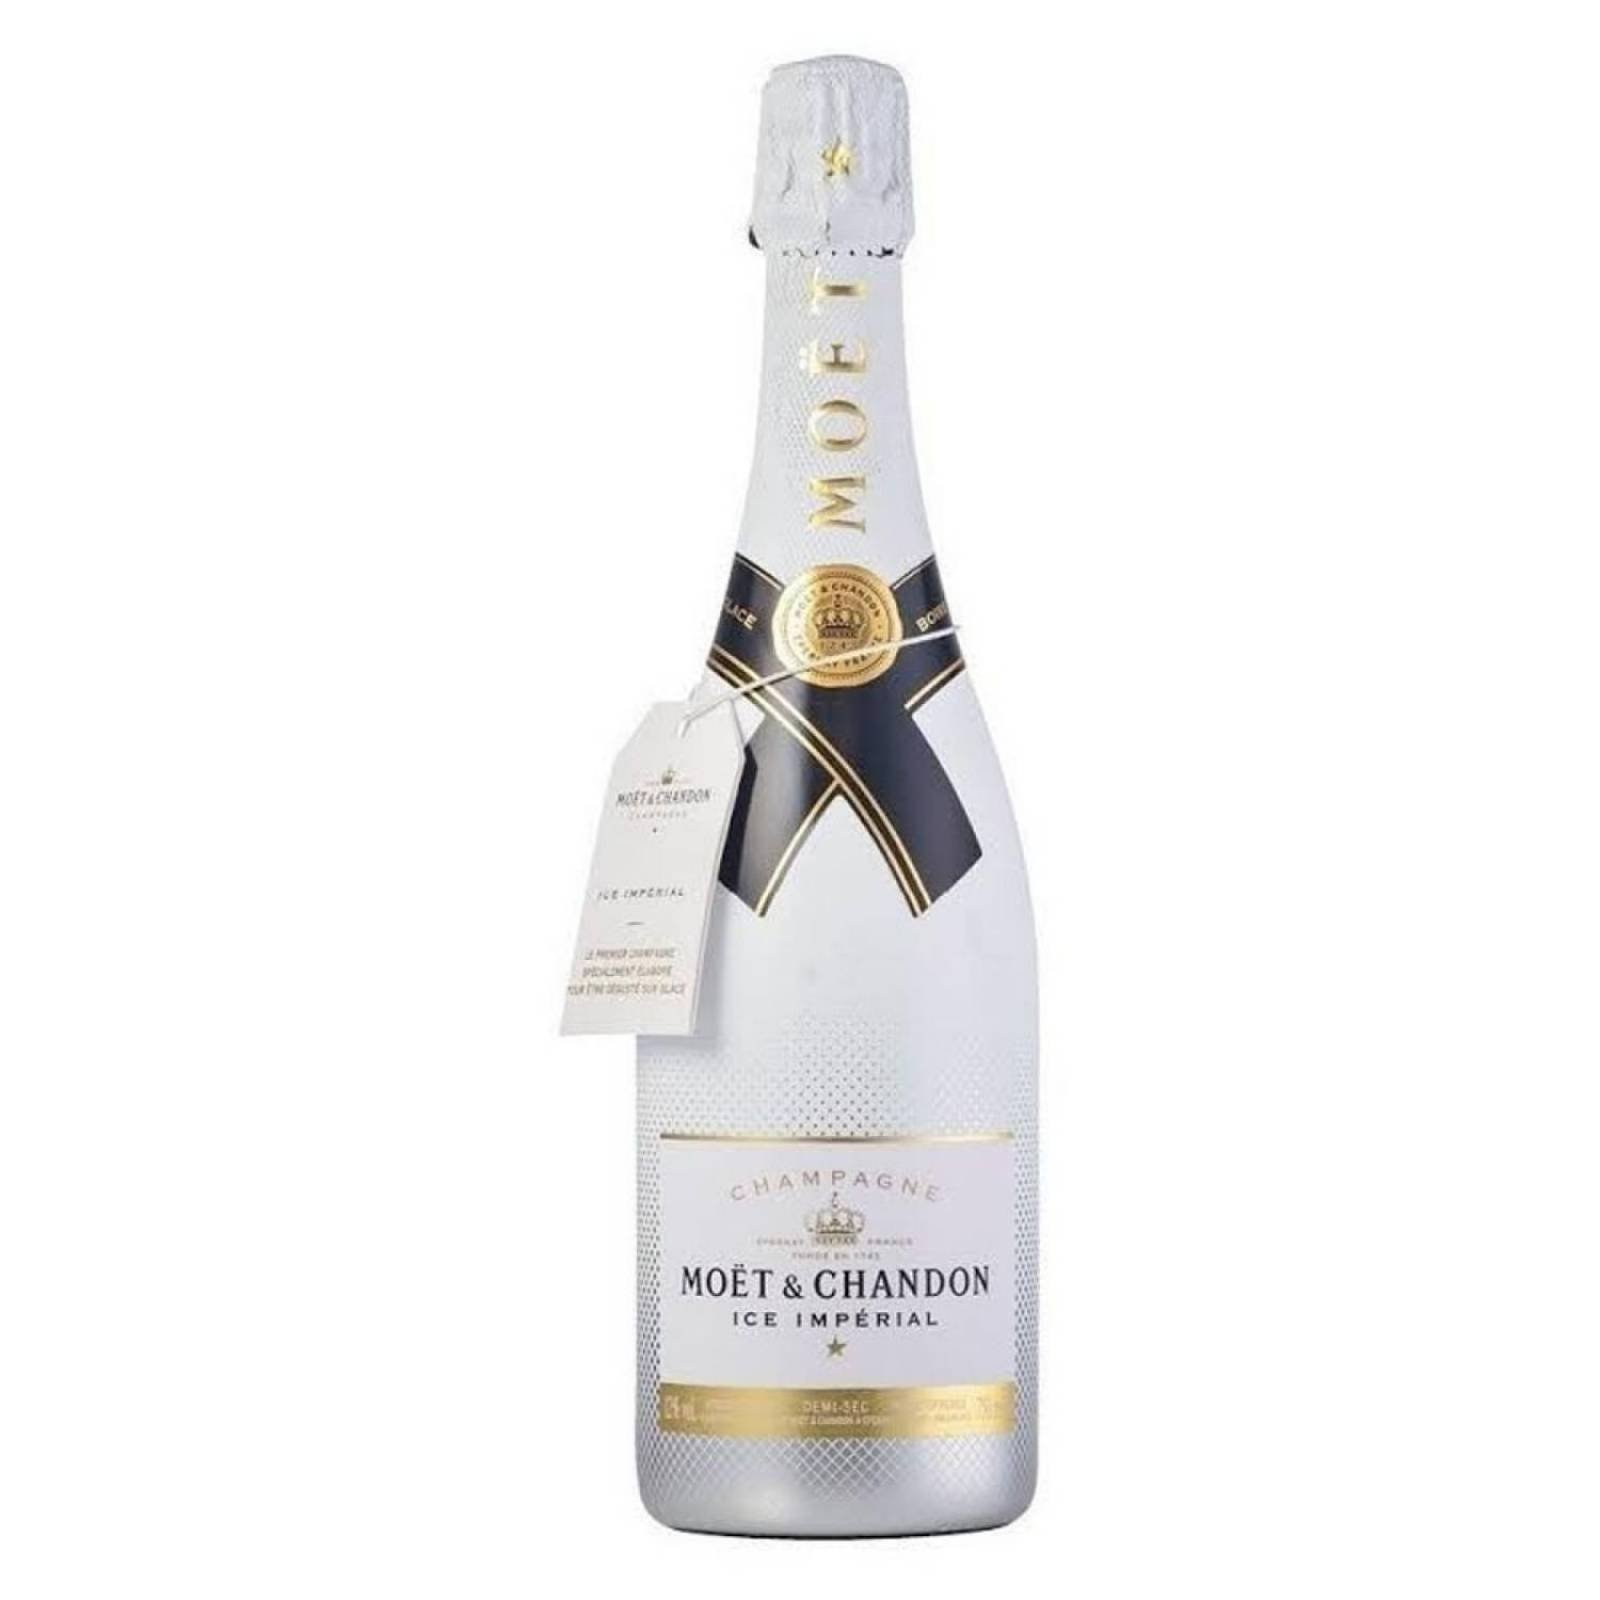 Champagne Moet Chandon Ice Imperial 750 ml 